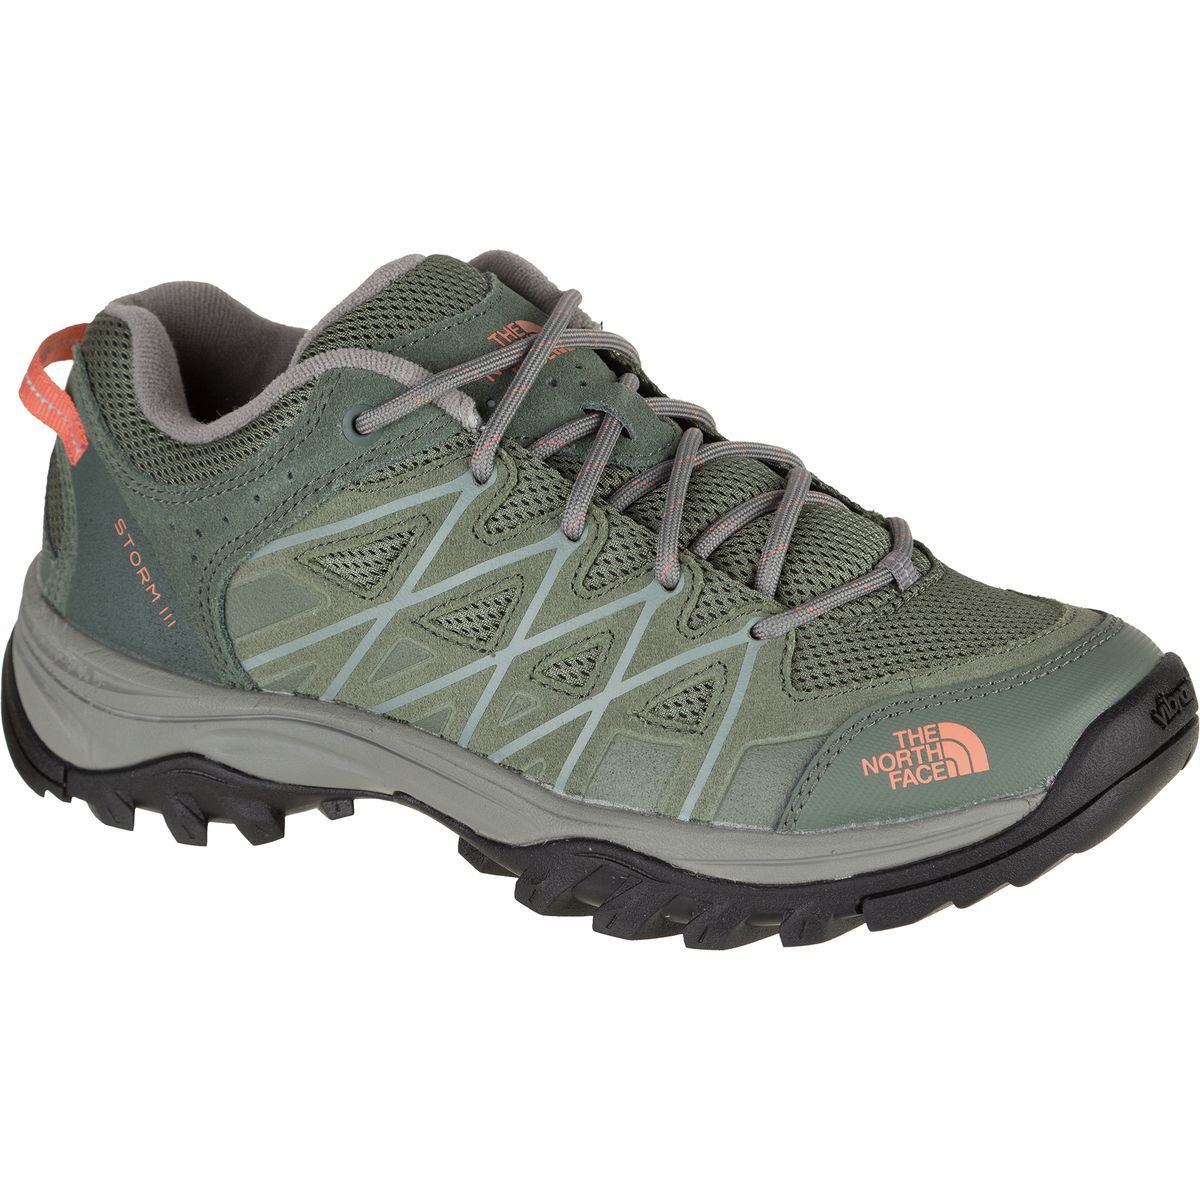 The North Face Storm III Hiking Shoe 